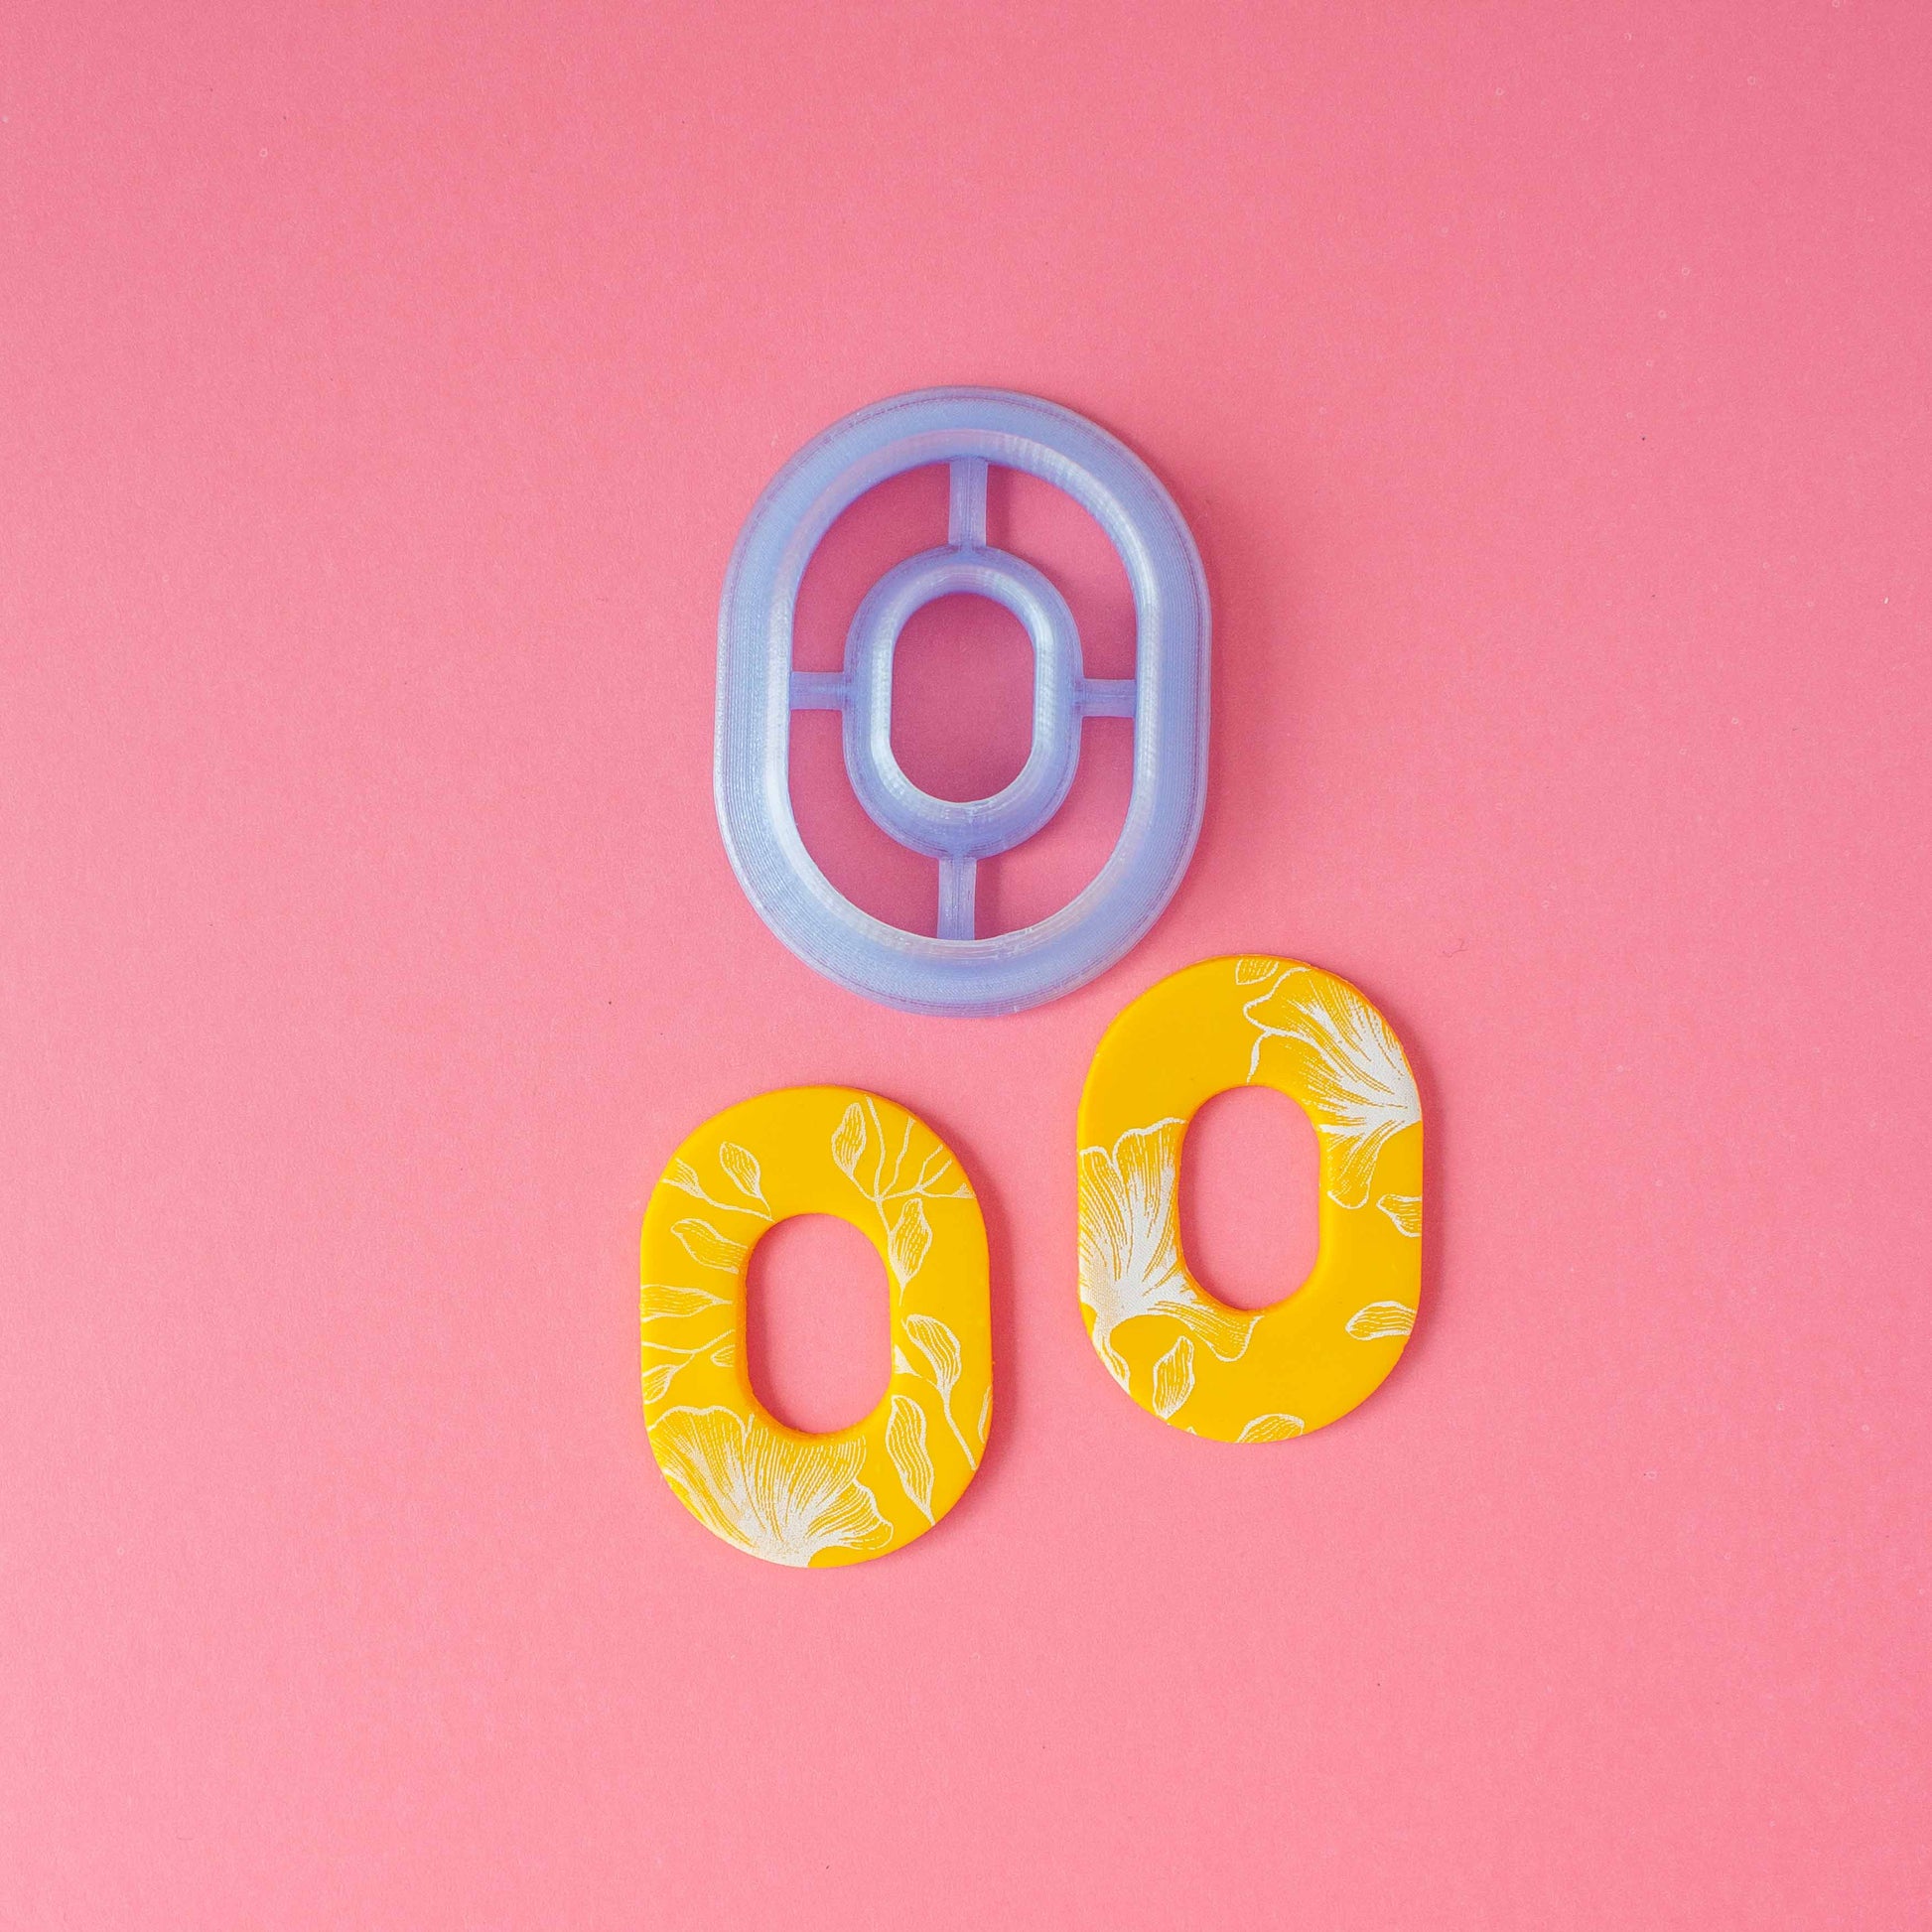 Double oval polymer clay cutter and a set of oval earrings in a pink background.